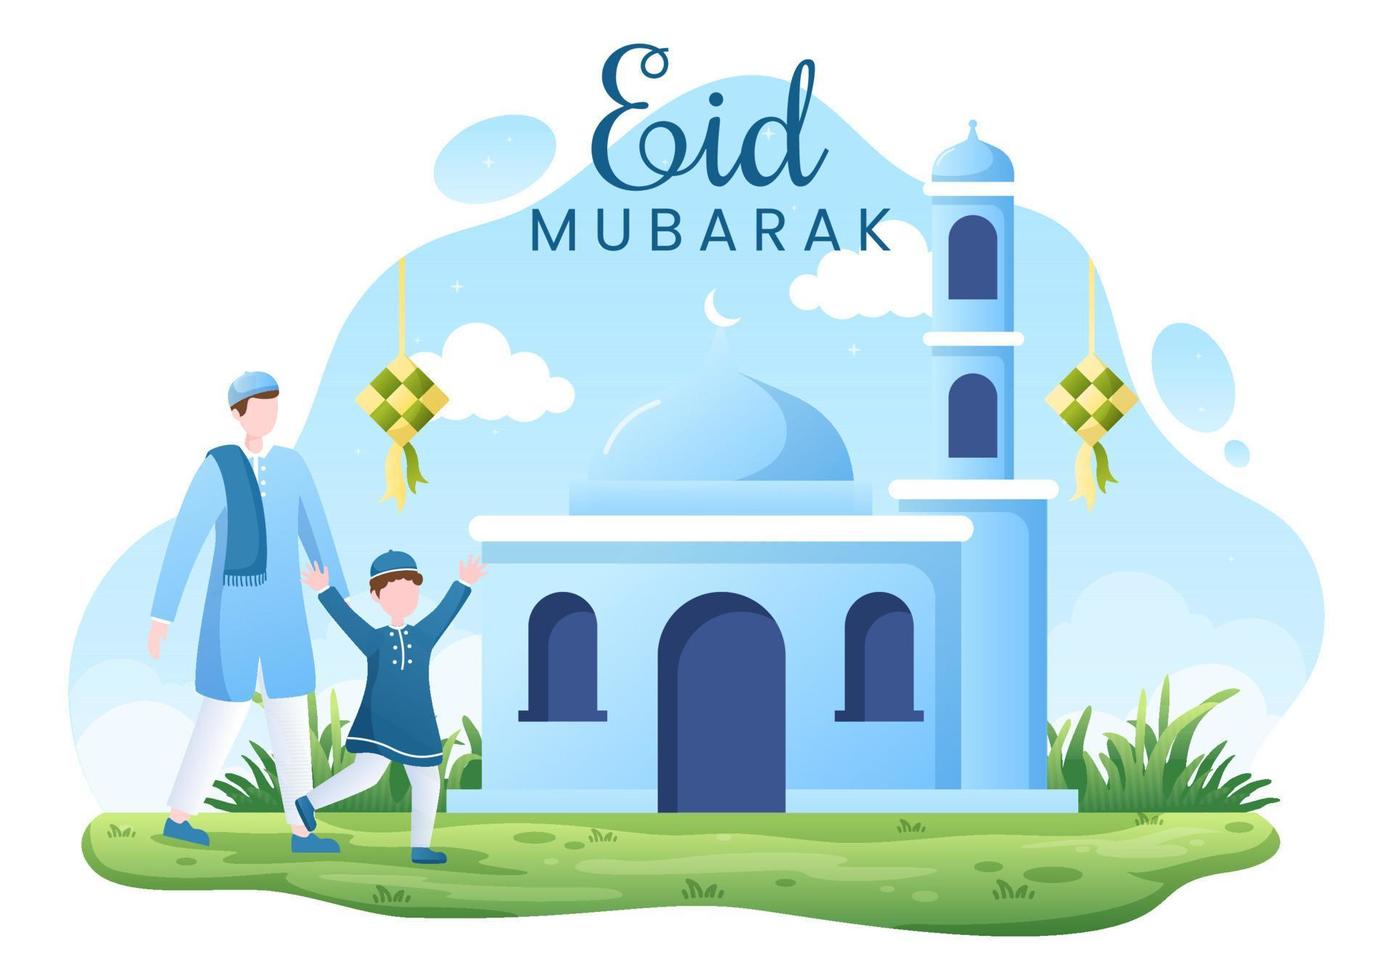 Happy Eid ul-Fitr Mubarak Background Illustration. Muslim People Celebrating with Shaking Hands Wishing Each Other and Apologize in Flat Style vector